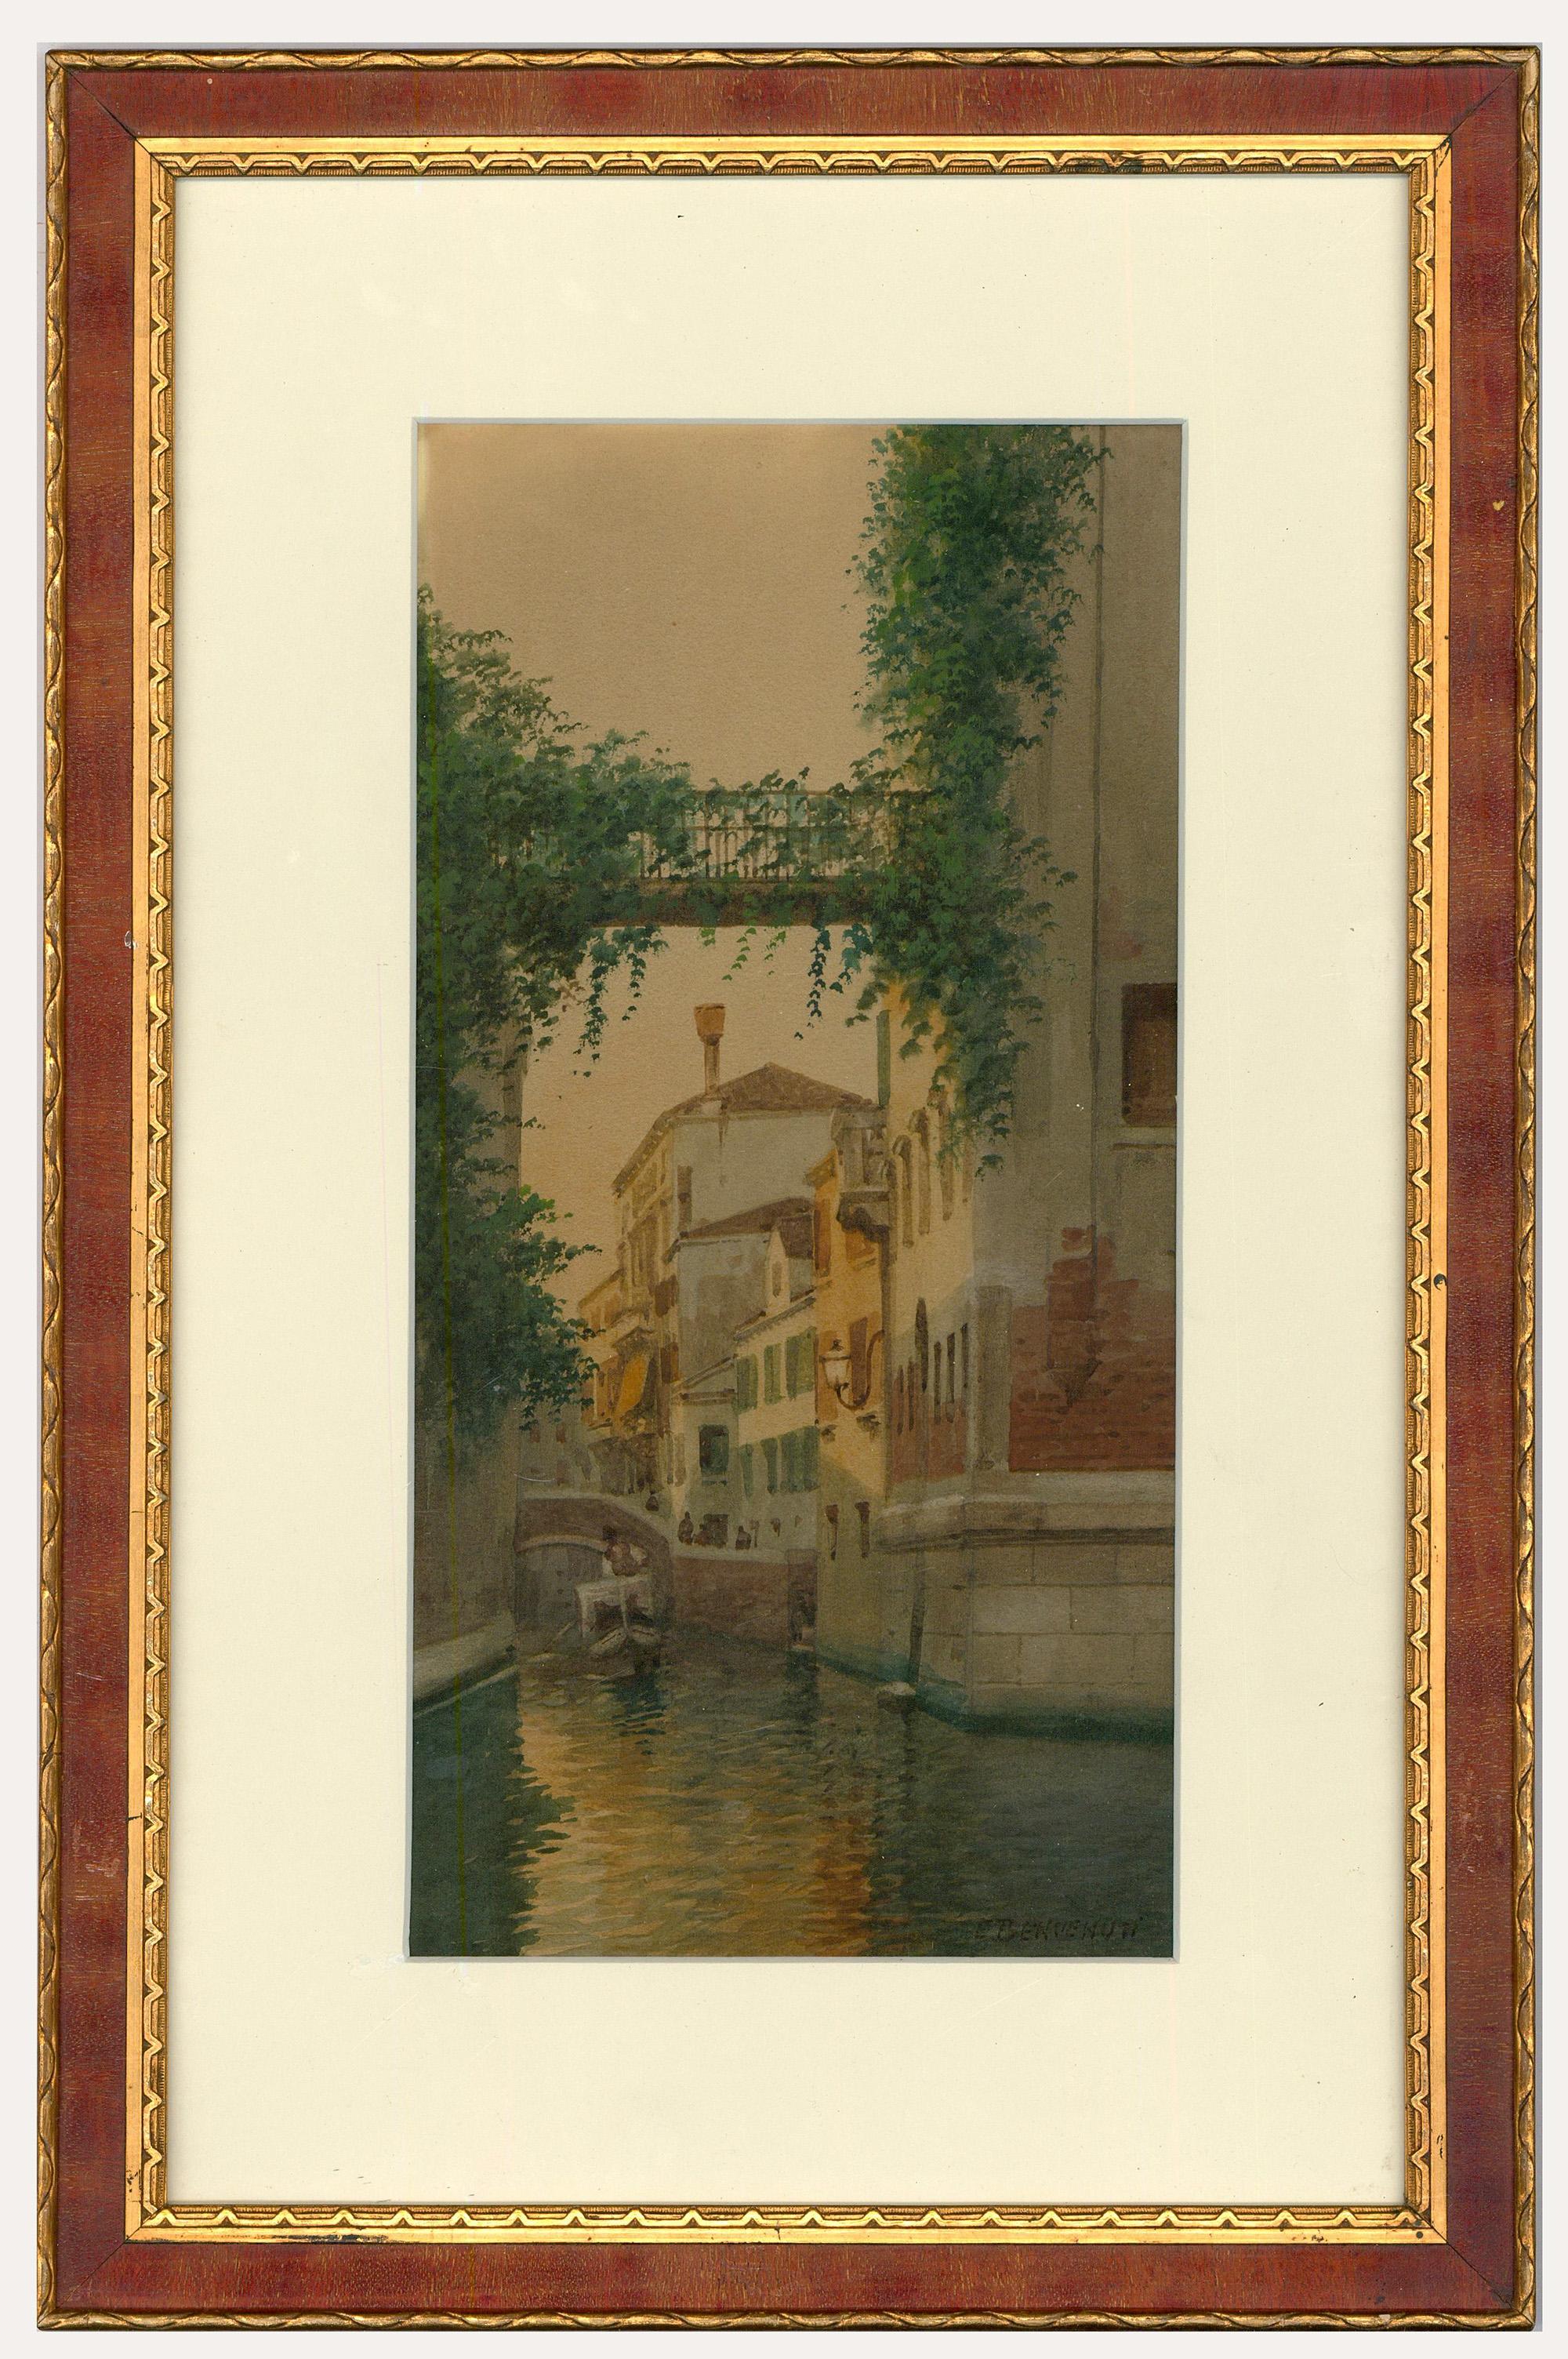 An accomplished watercolour by the well-listed Italian artist Eugenio Benvenuti. The scene depicts an evening view in Venice, with gondola travelling along the canal. Benvenuti's sensitive depiction of reflective water is typical of his work. The